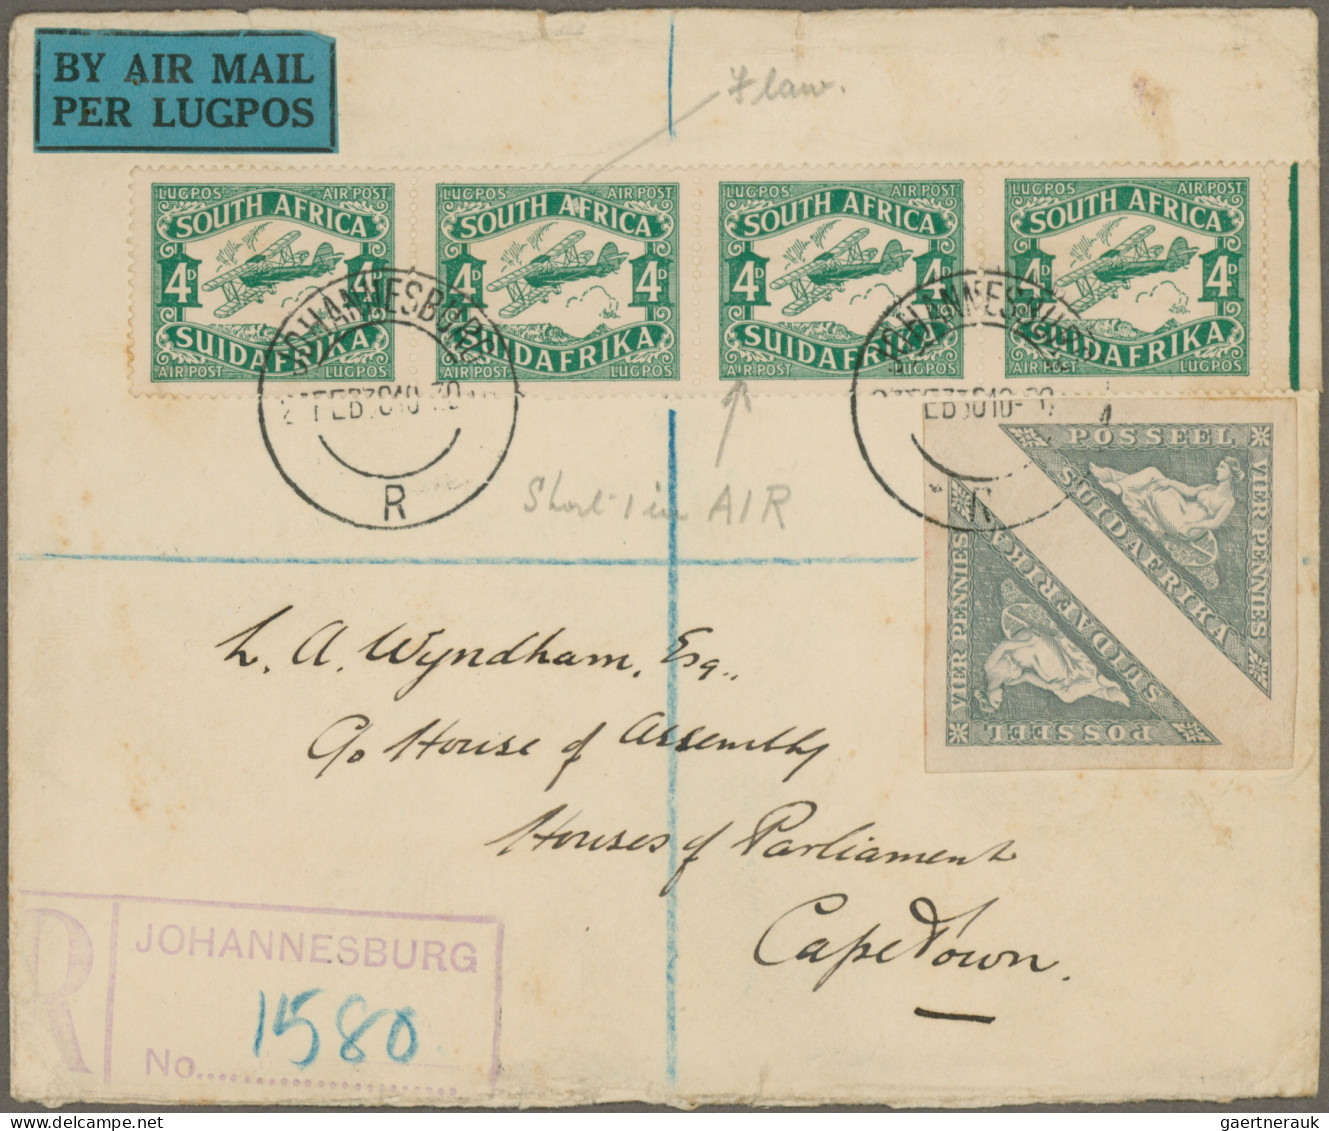 South Africa: 1925/1938 Six airmail covers to England (2) resp. inland, with 192